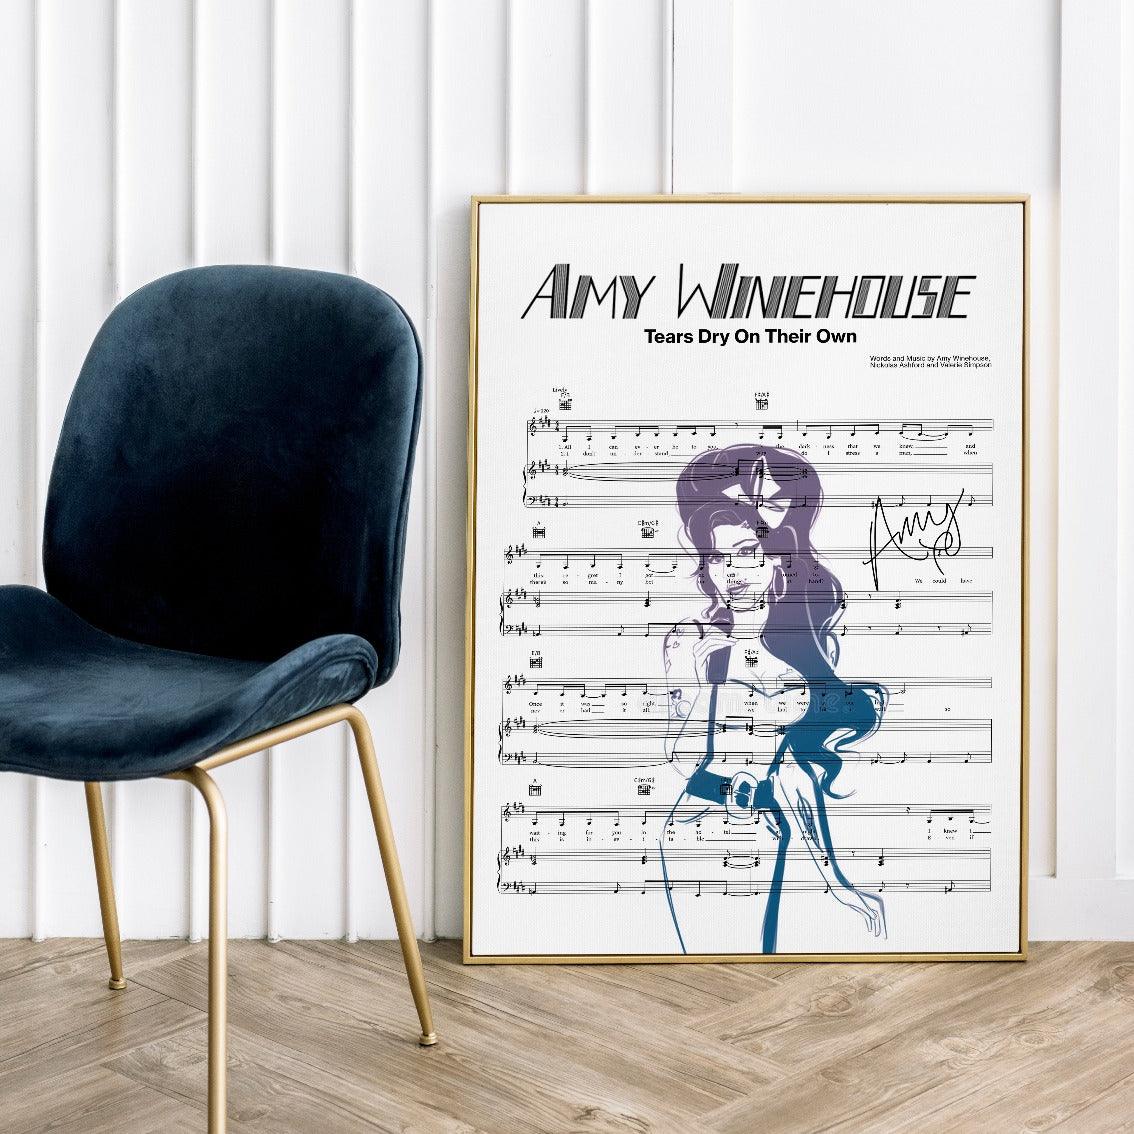 Print lyrical with these unusual and Natural High quality black and white musical scores with brightly coloured illustrations and quirky art print by artist Amy Winehouse - Tears Dry On Their Own to put on the wall of the room at home. A4 Posters uk By 98types art online.